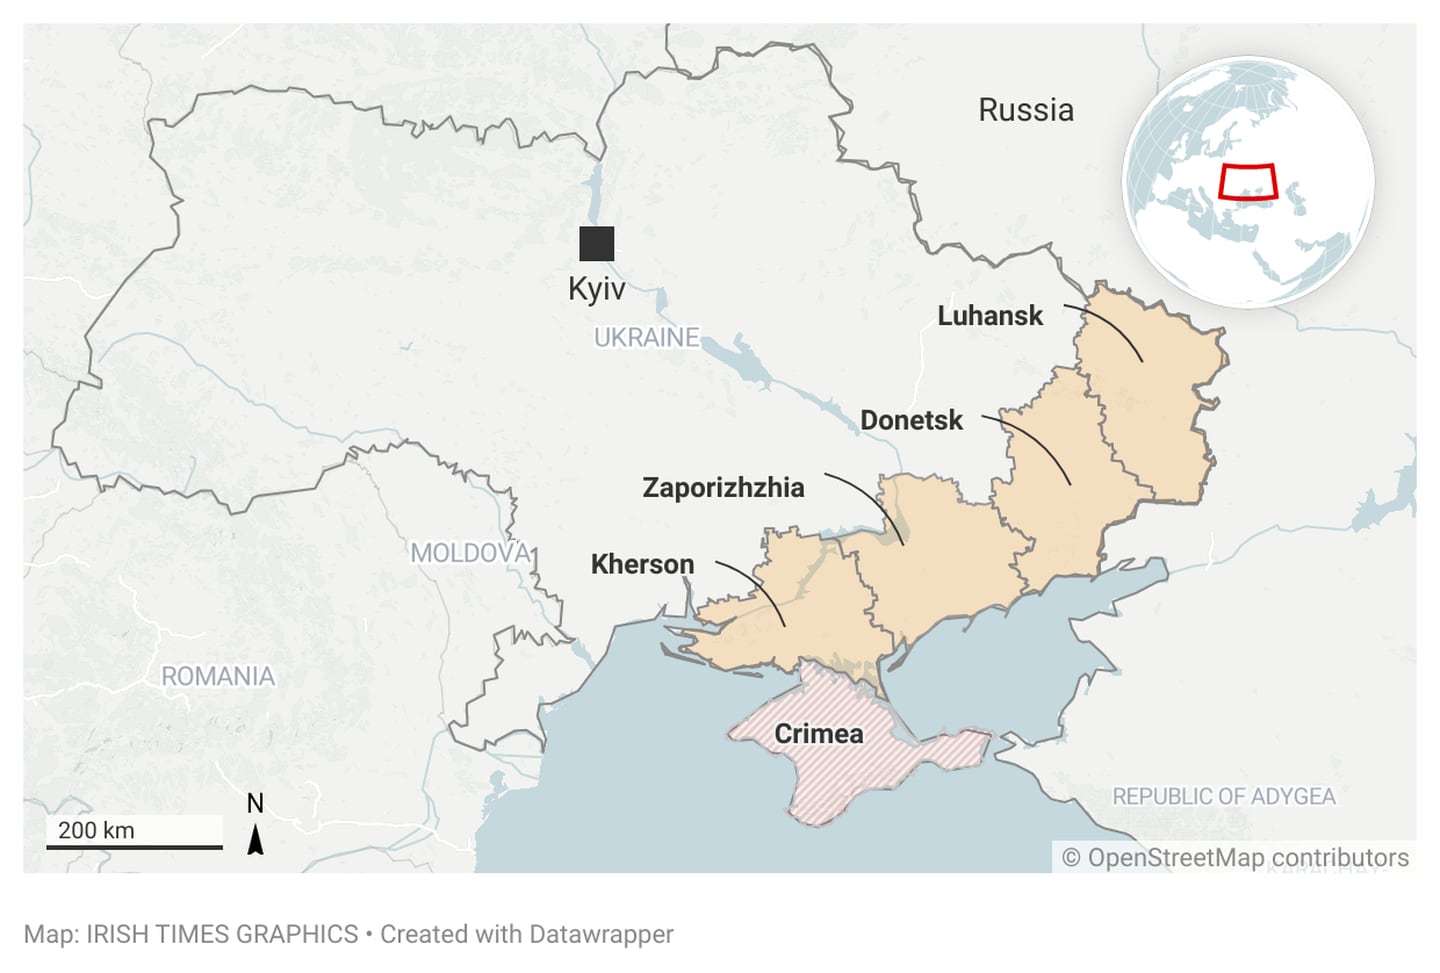 Map showing the four regions in Ukraine that Russia says it will annex following referendums in Donetsk, Luhansk, Kherson and Zaporizhia